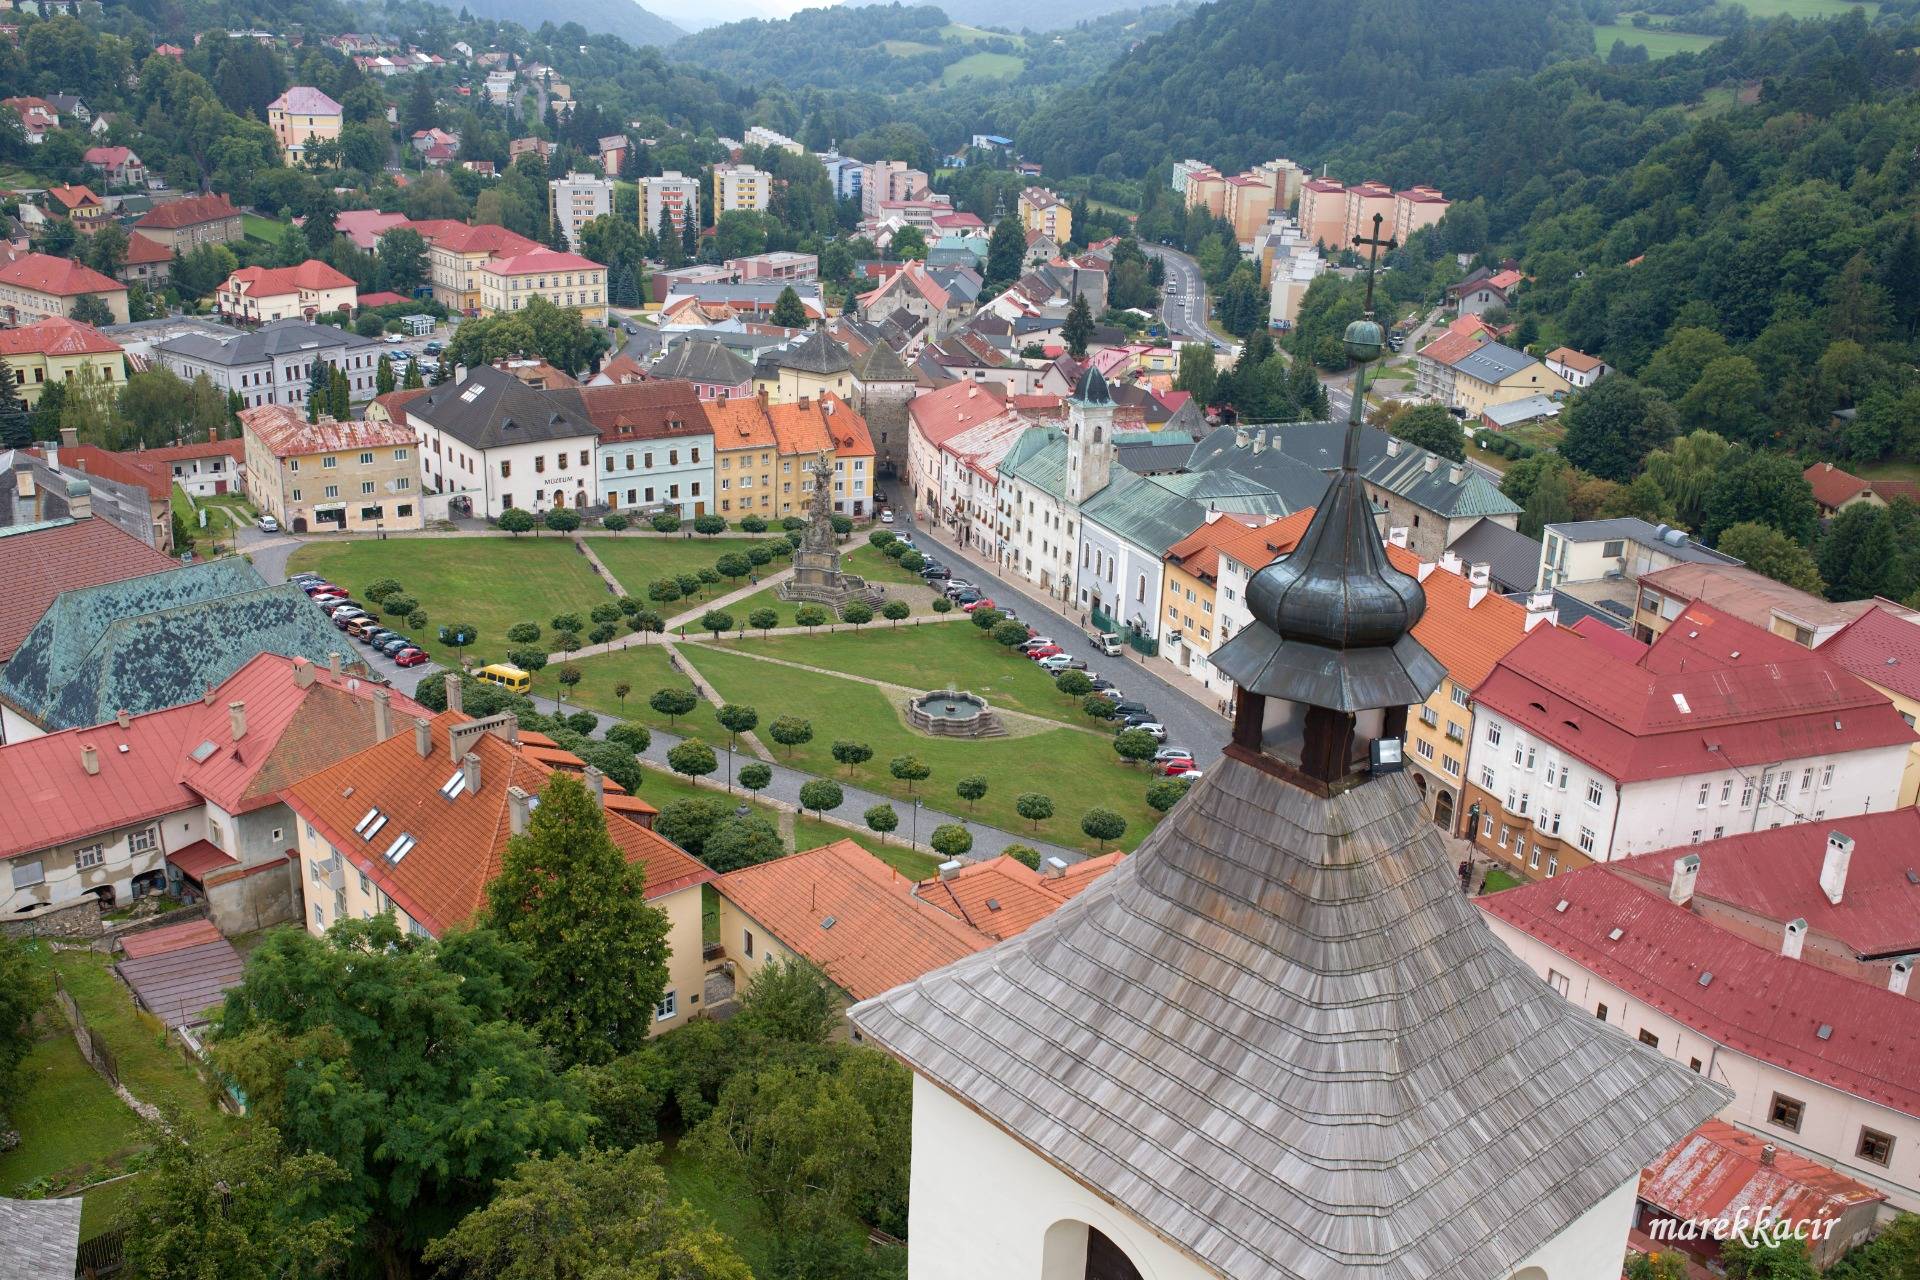 A trip to the historic mining town of Kremnica